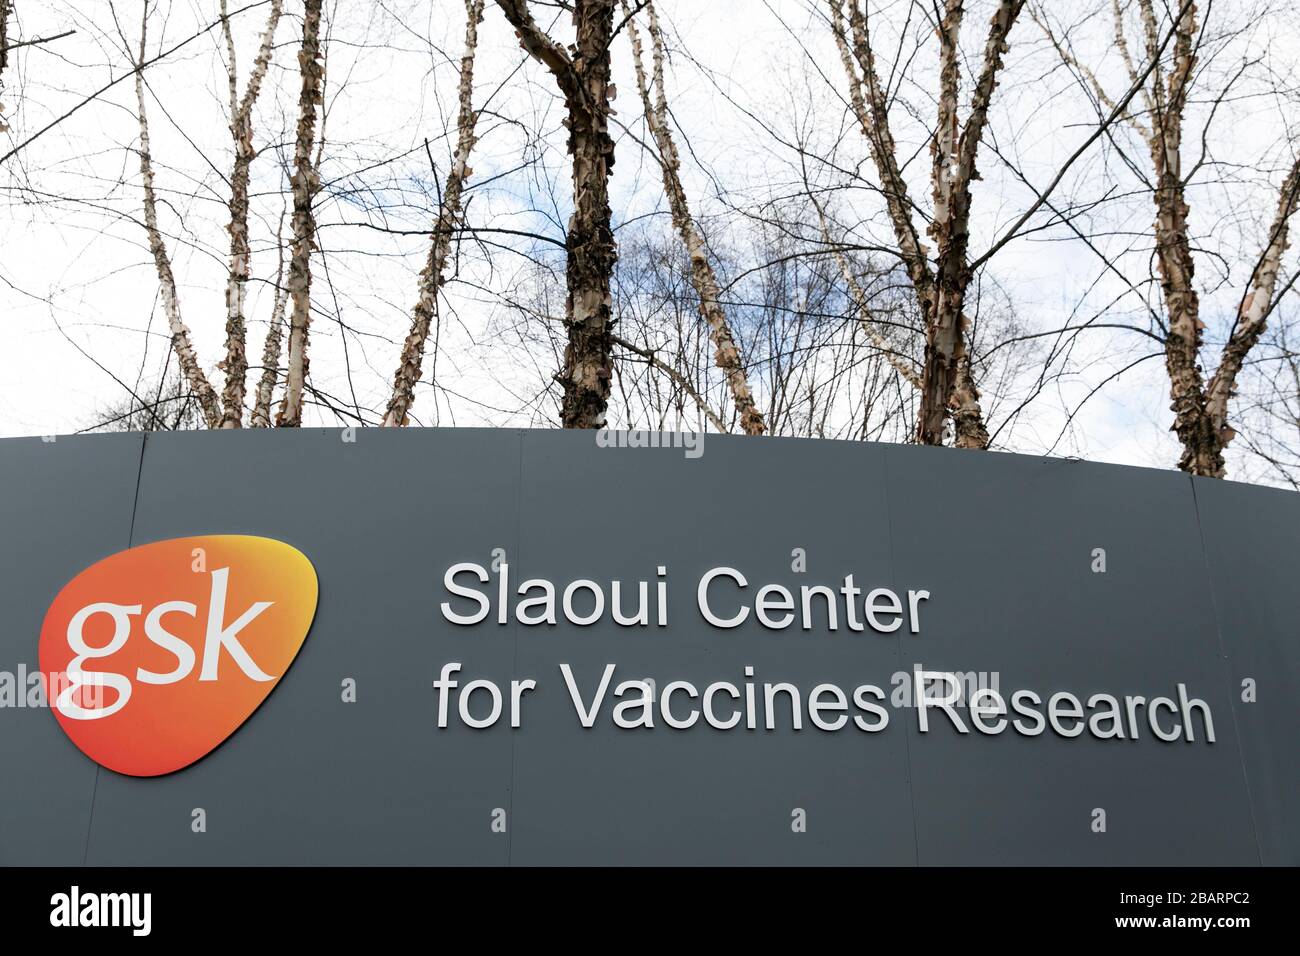 A logo sign outside of the GlaxoSmithKline (GSK) Slaoui Center for Vaccines Research in Rockville, Maryland on March 22, 2020. Stock Photo